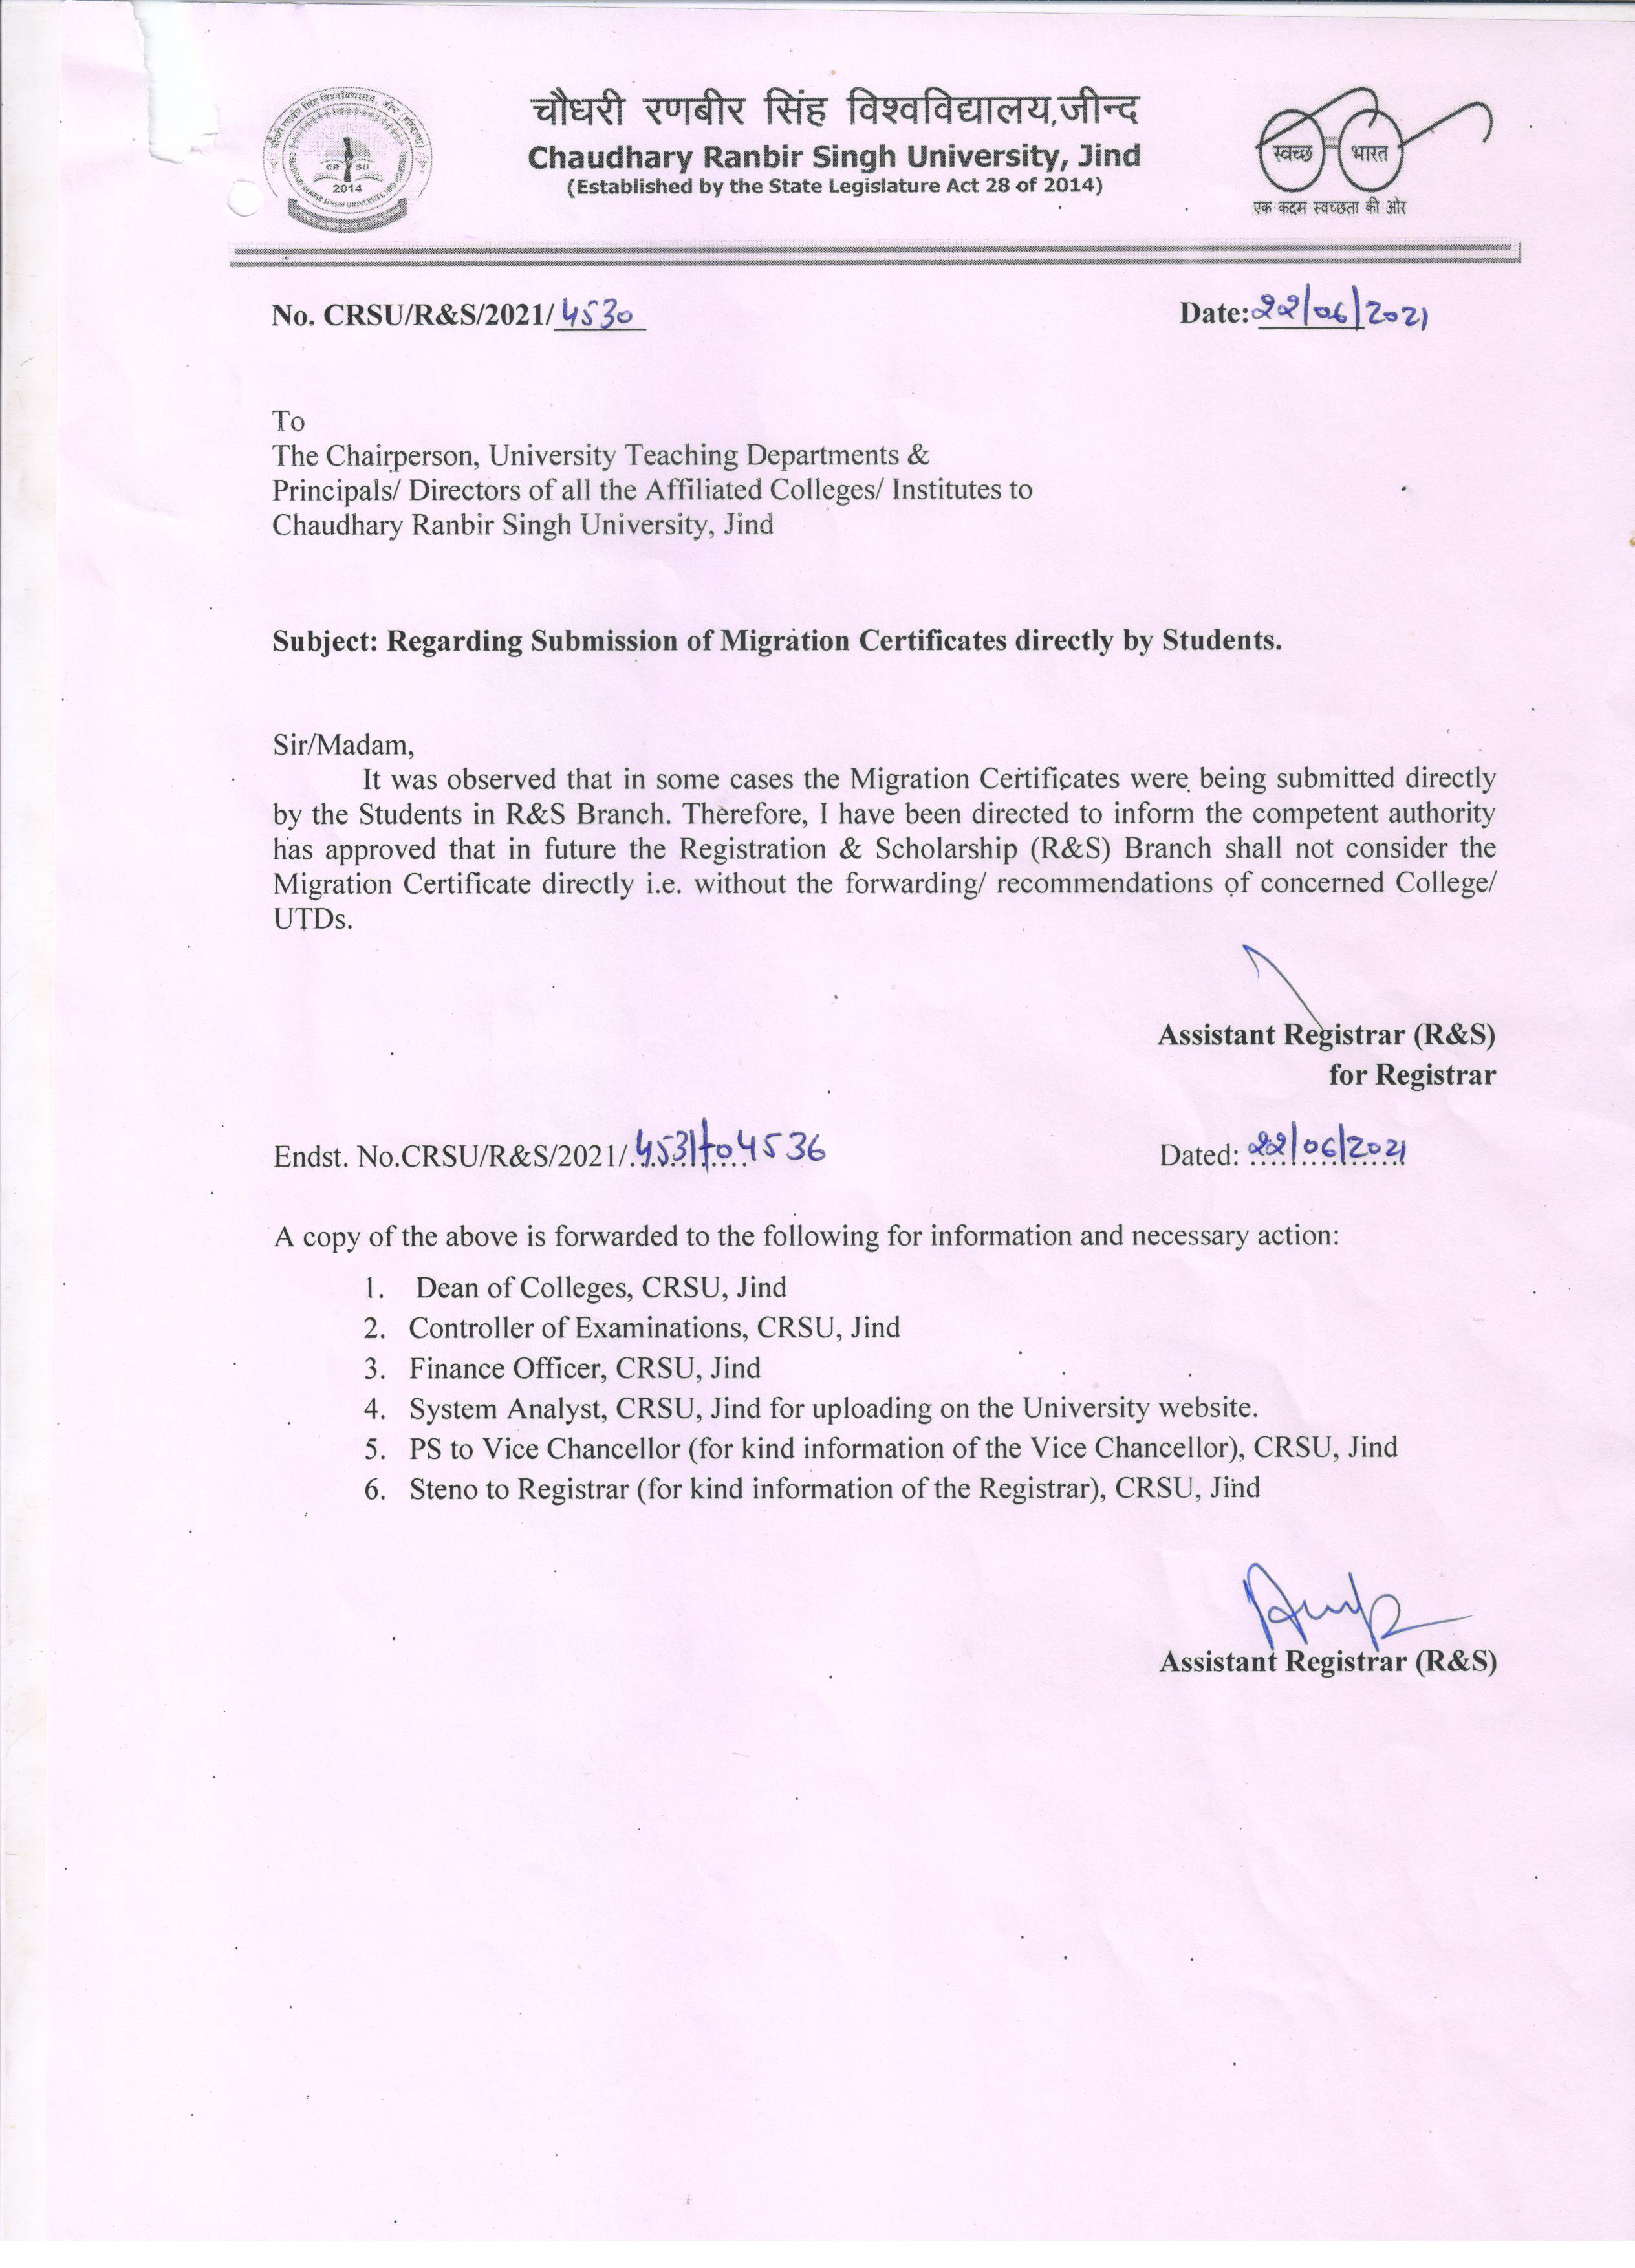 Regarding Submission of Migration Certificate by the students 